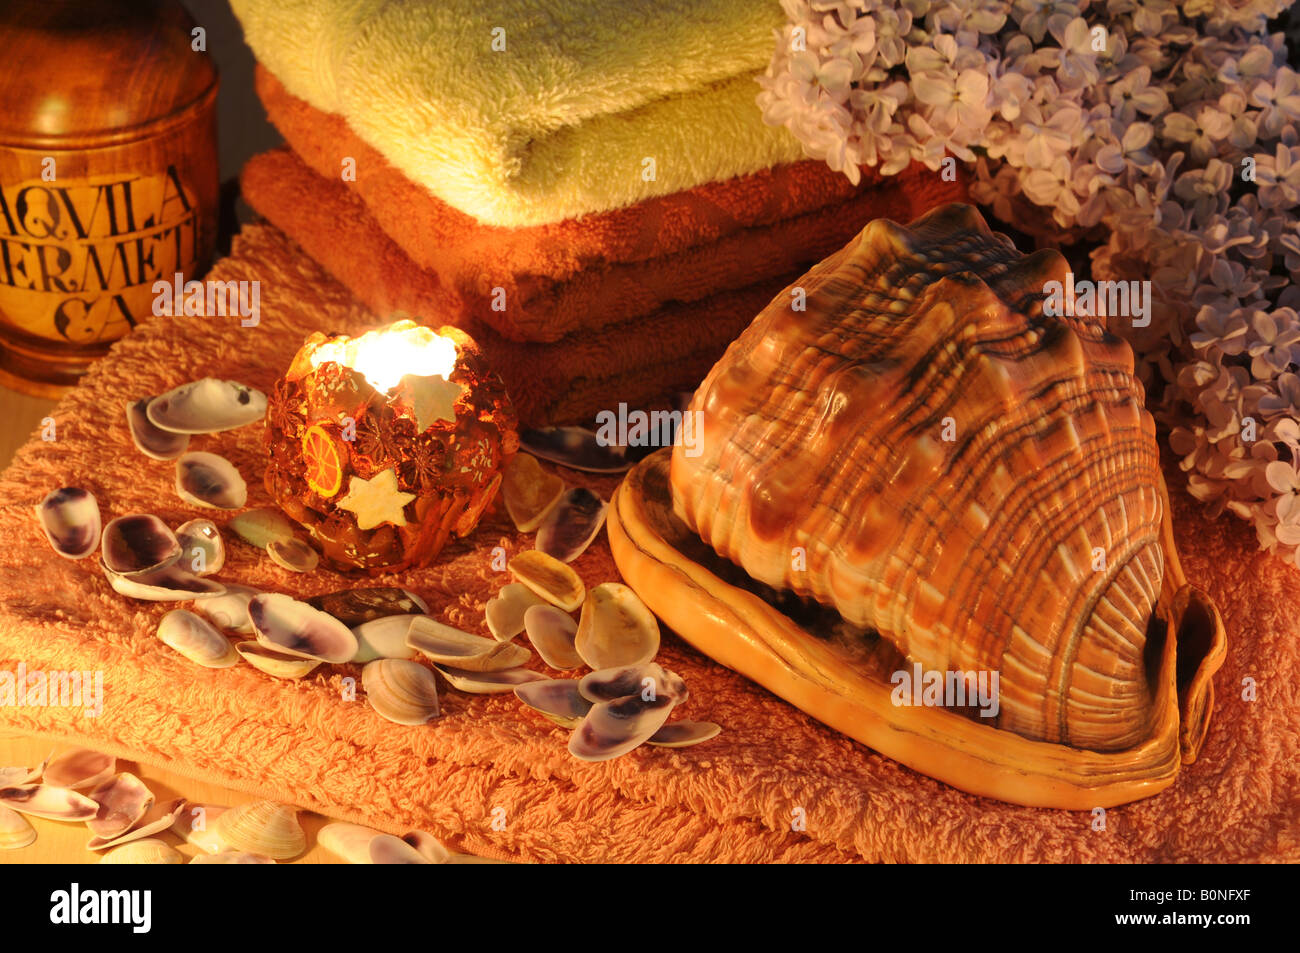 Red and yellow towels conch sea shells and lilac flowers lit by candle Stock Photo